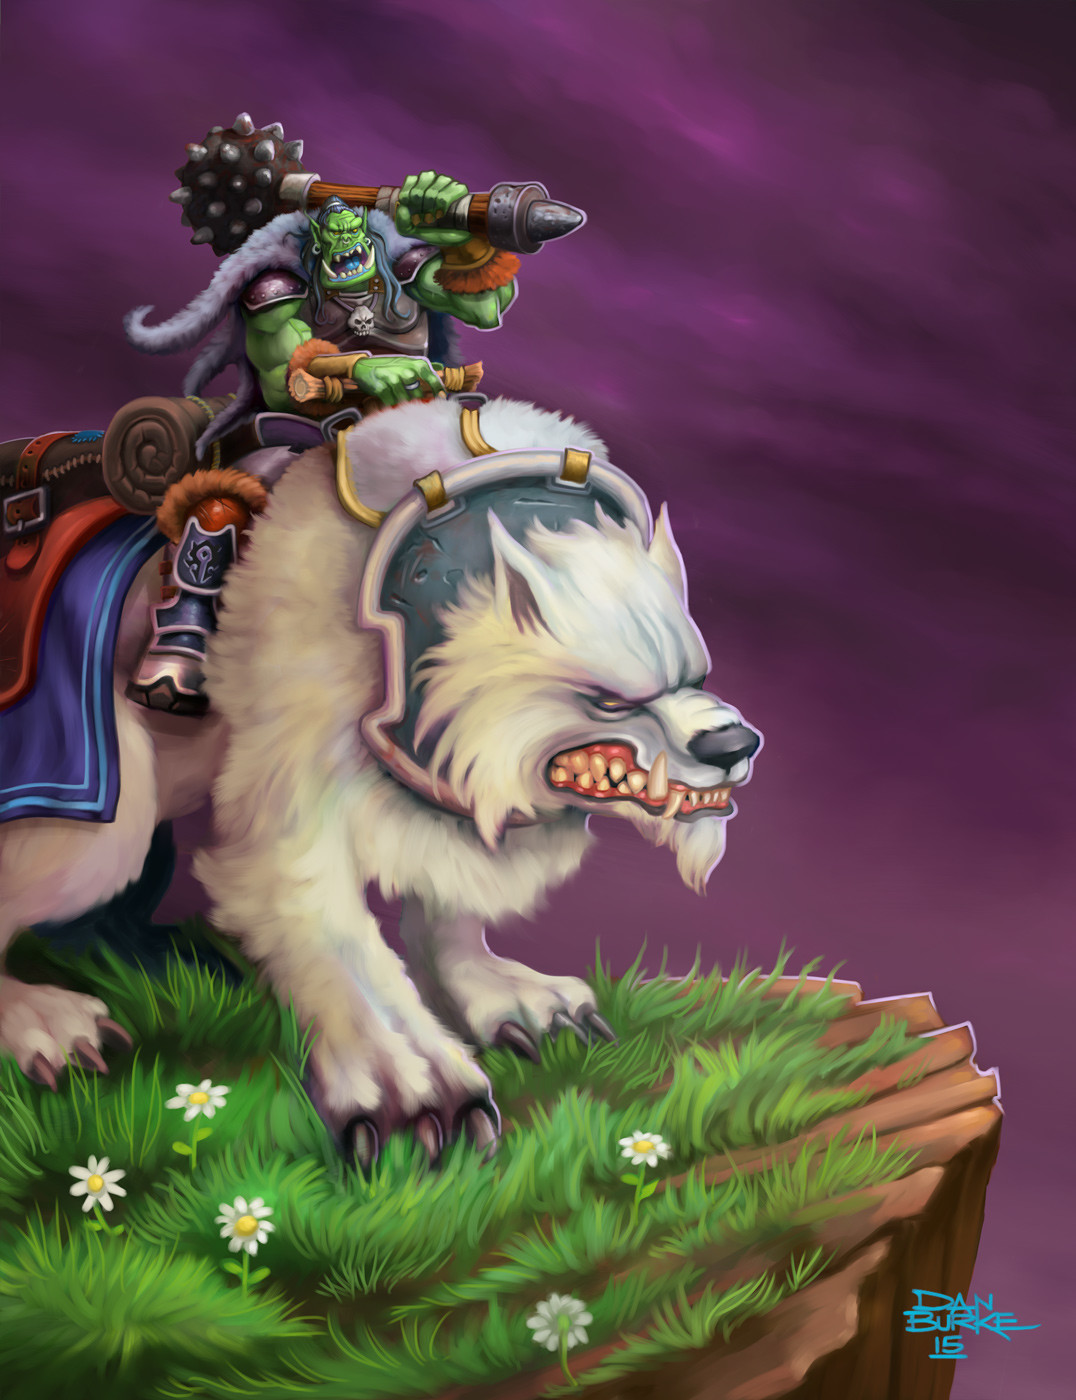 'Wolf Rider'. This is a Digital Painting inspired by World of Warcraft and techniques I learned from Matt Dixon's excellent painting book.